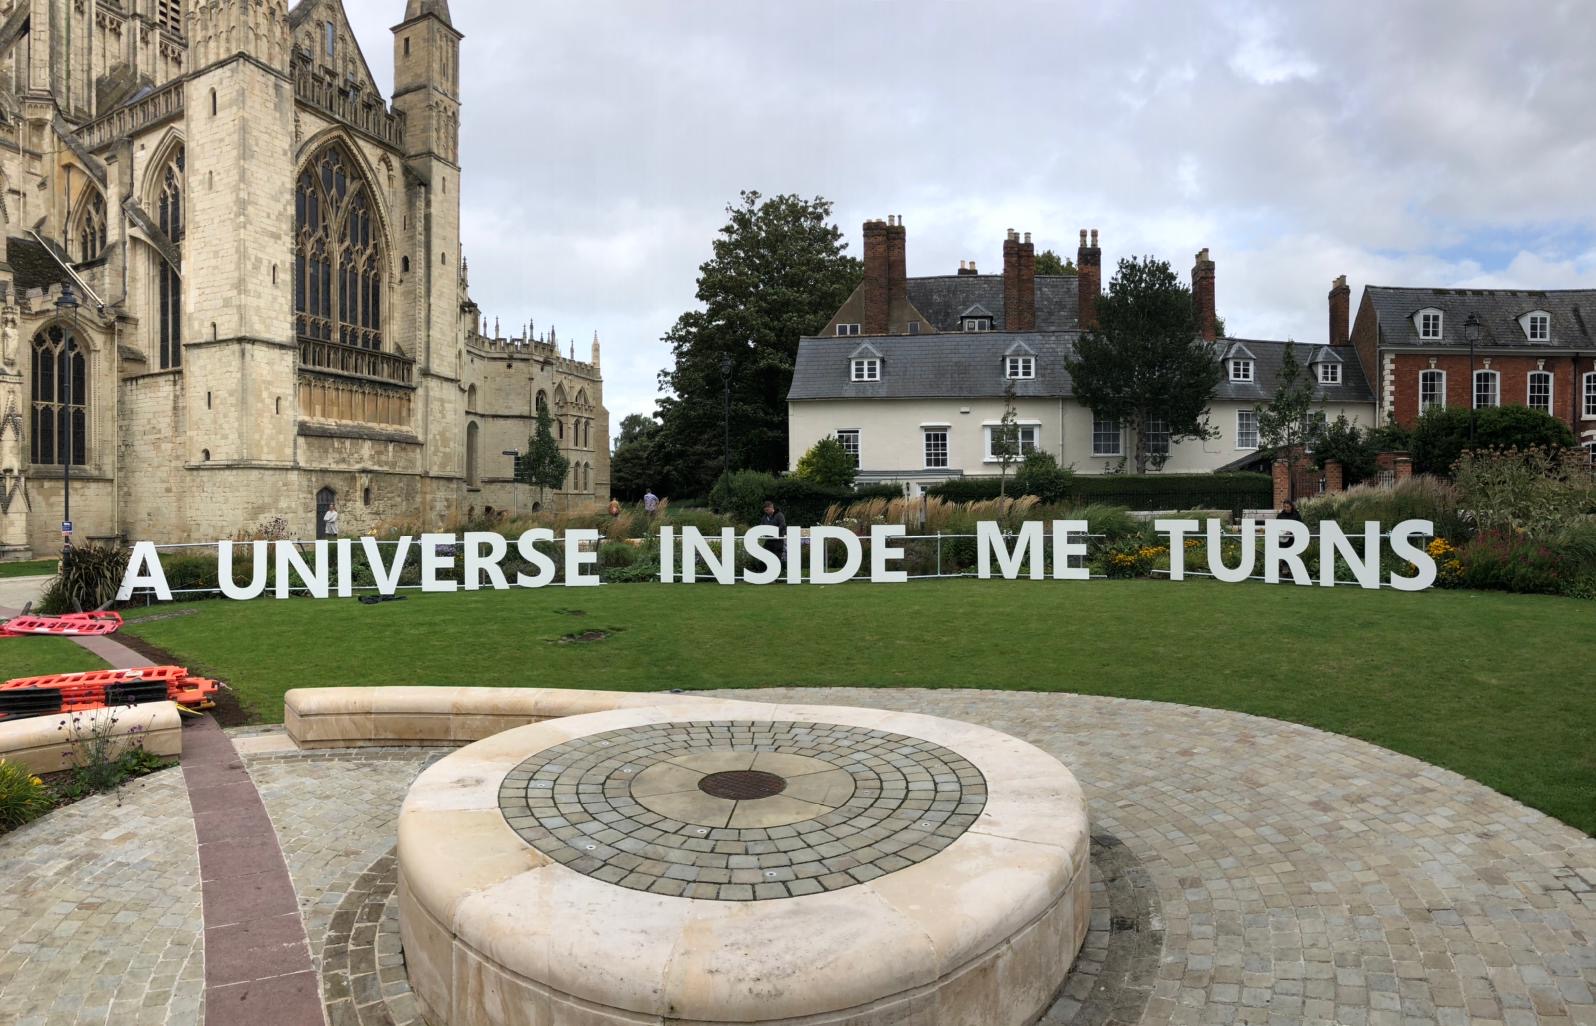 Giant letters 'A Universe Inside me Turns'